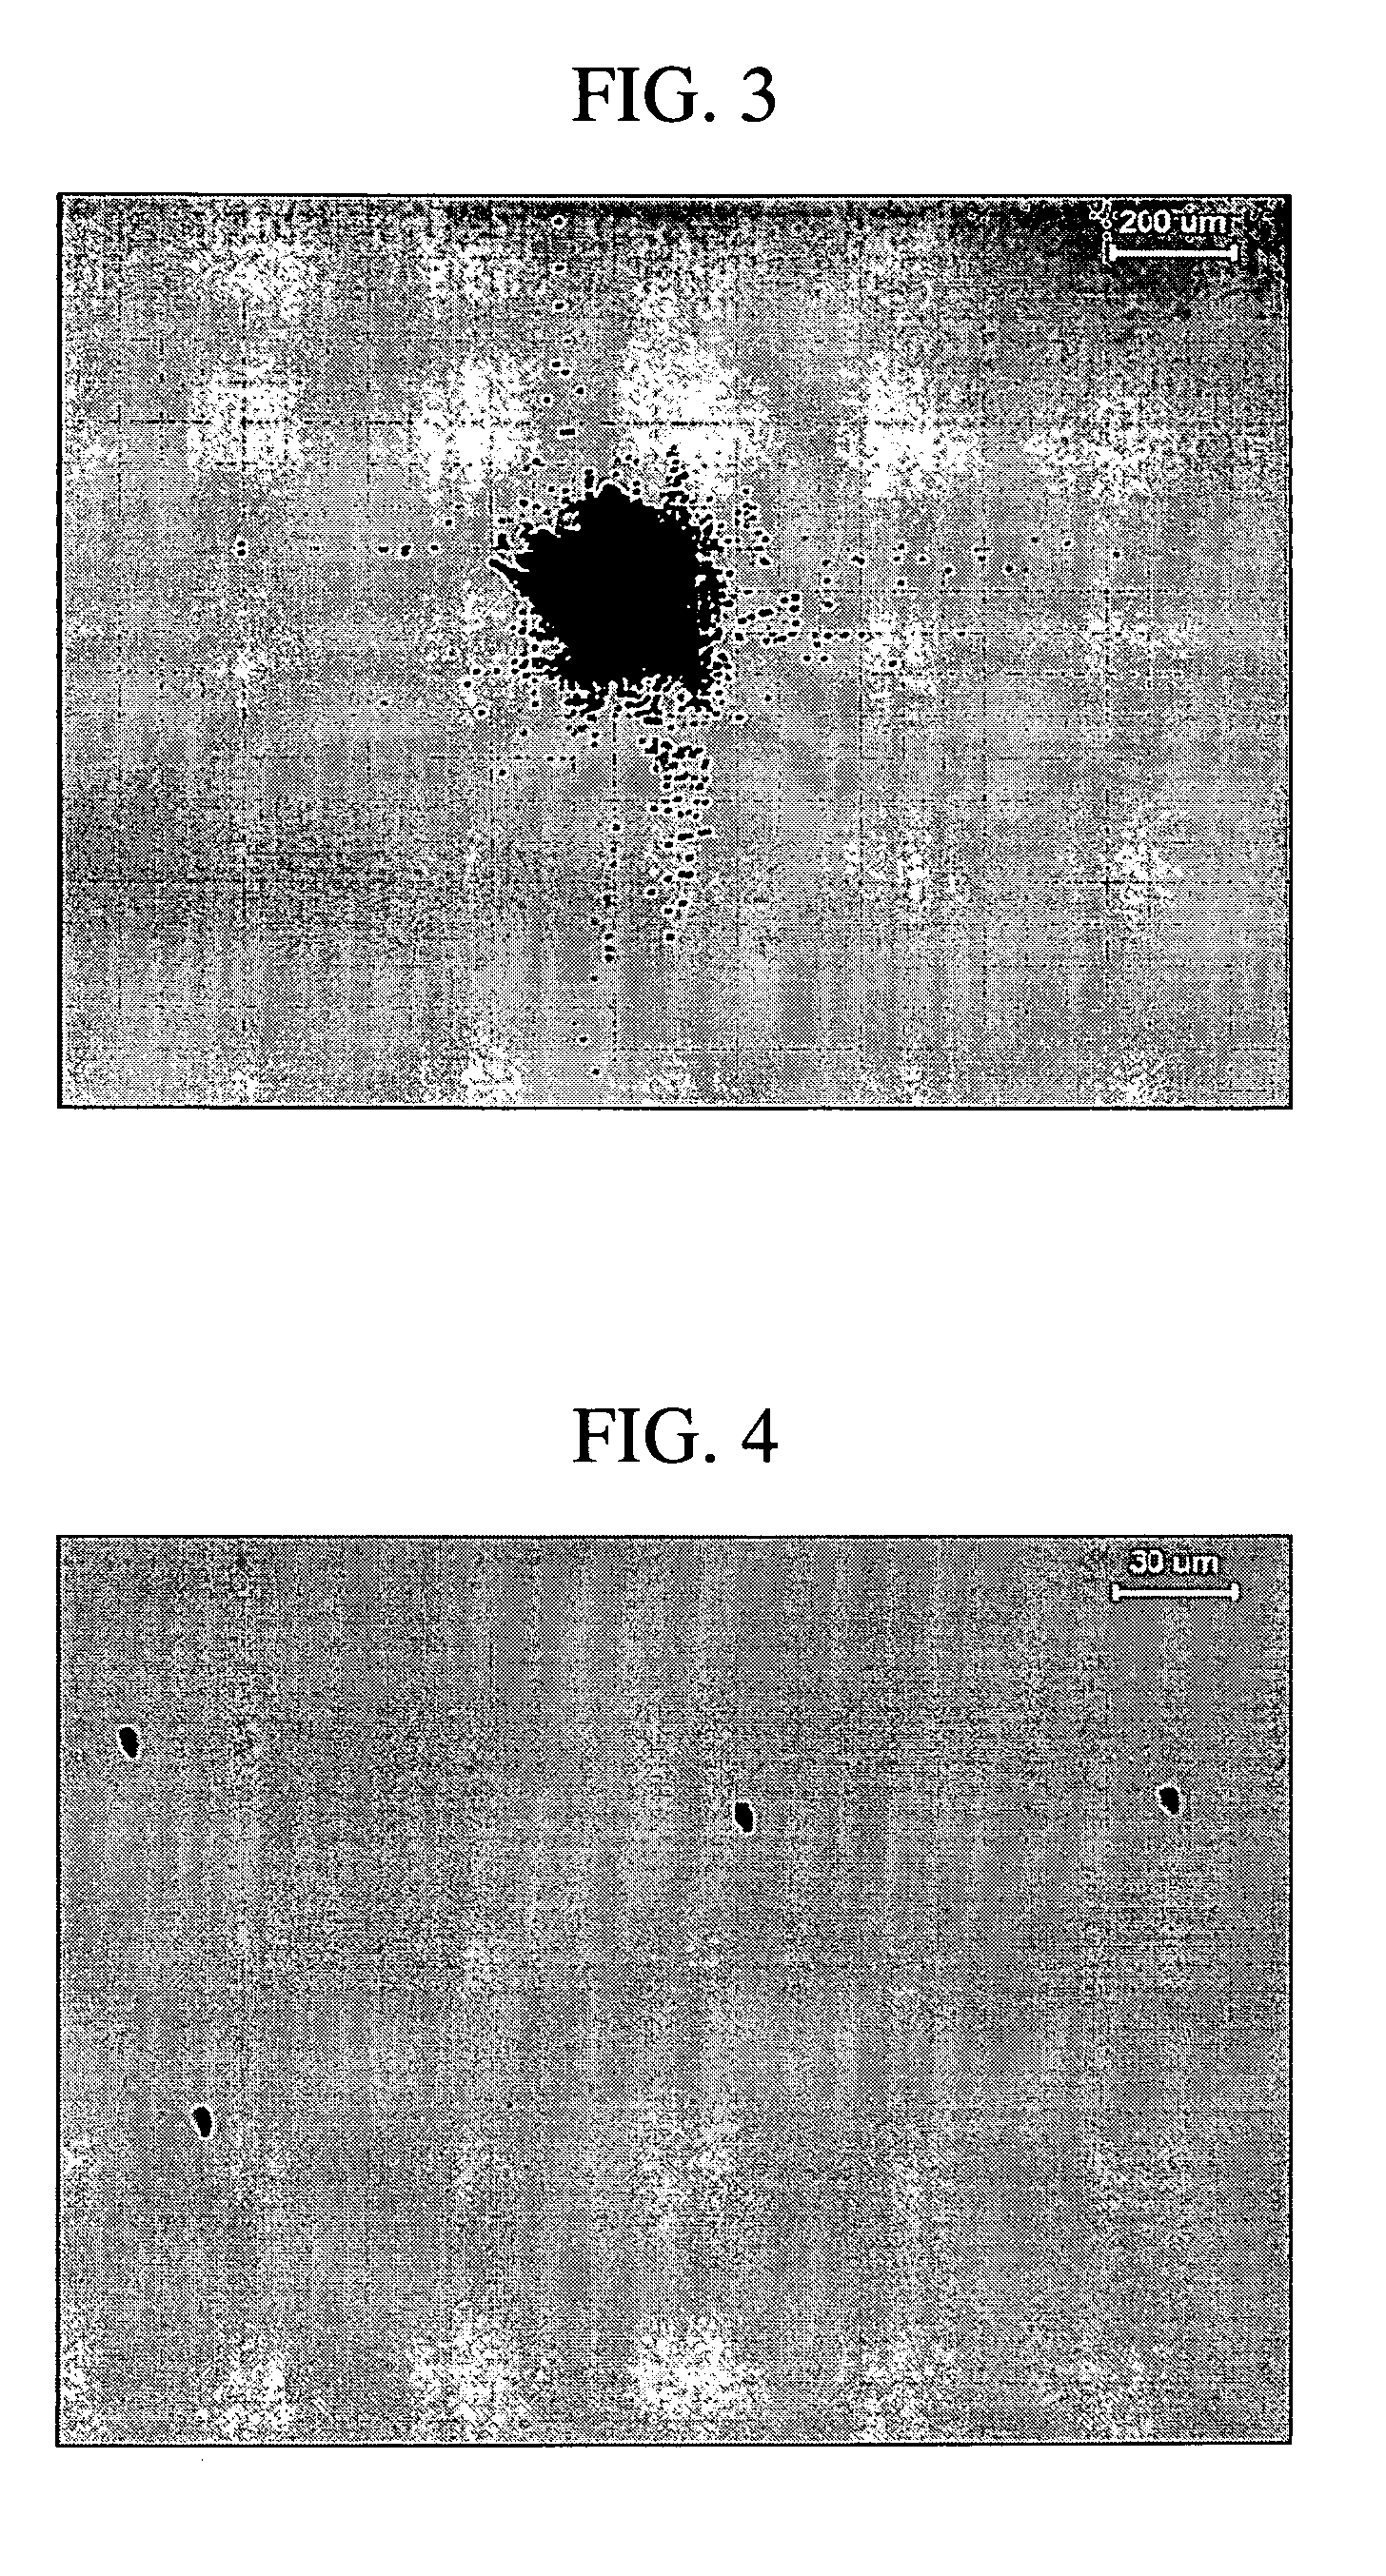 Wafer support pin for preventing slip dislocation during annealing of water and wafer annealing method using the same